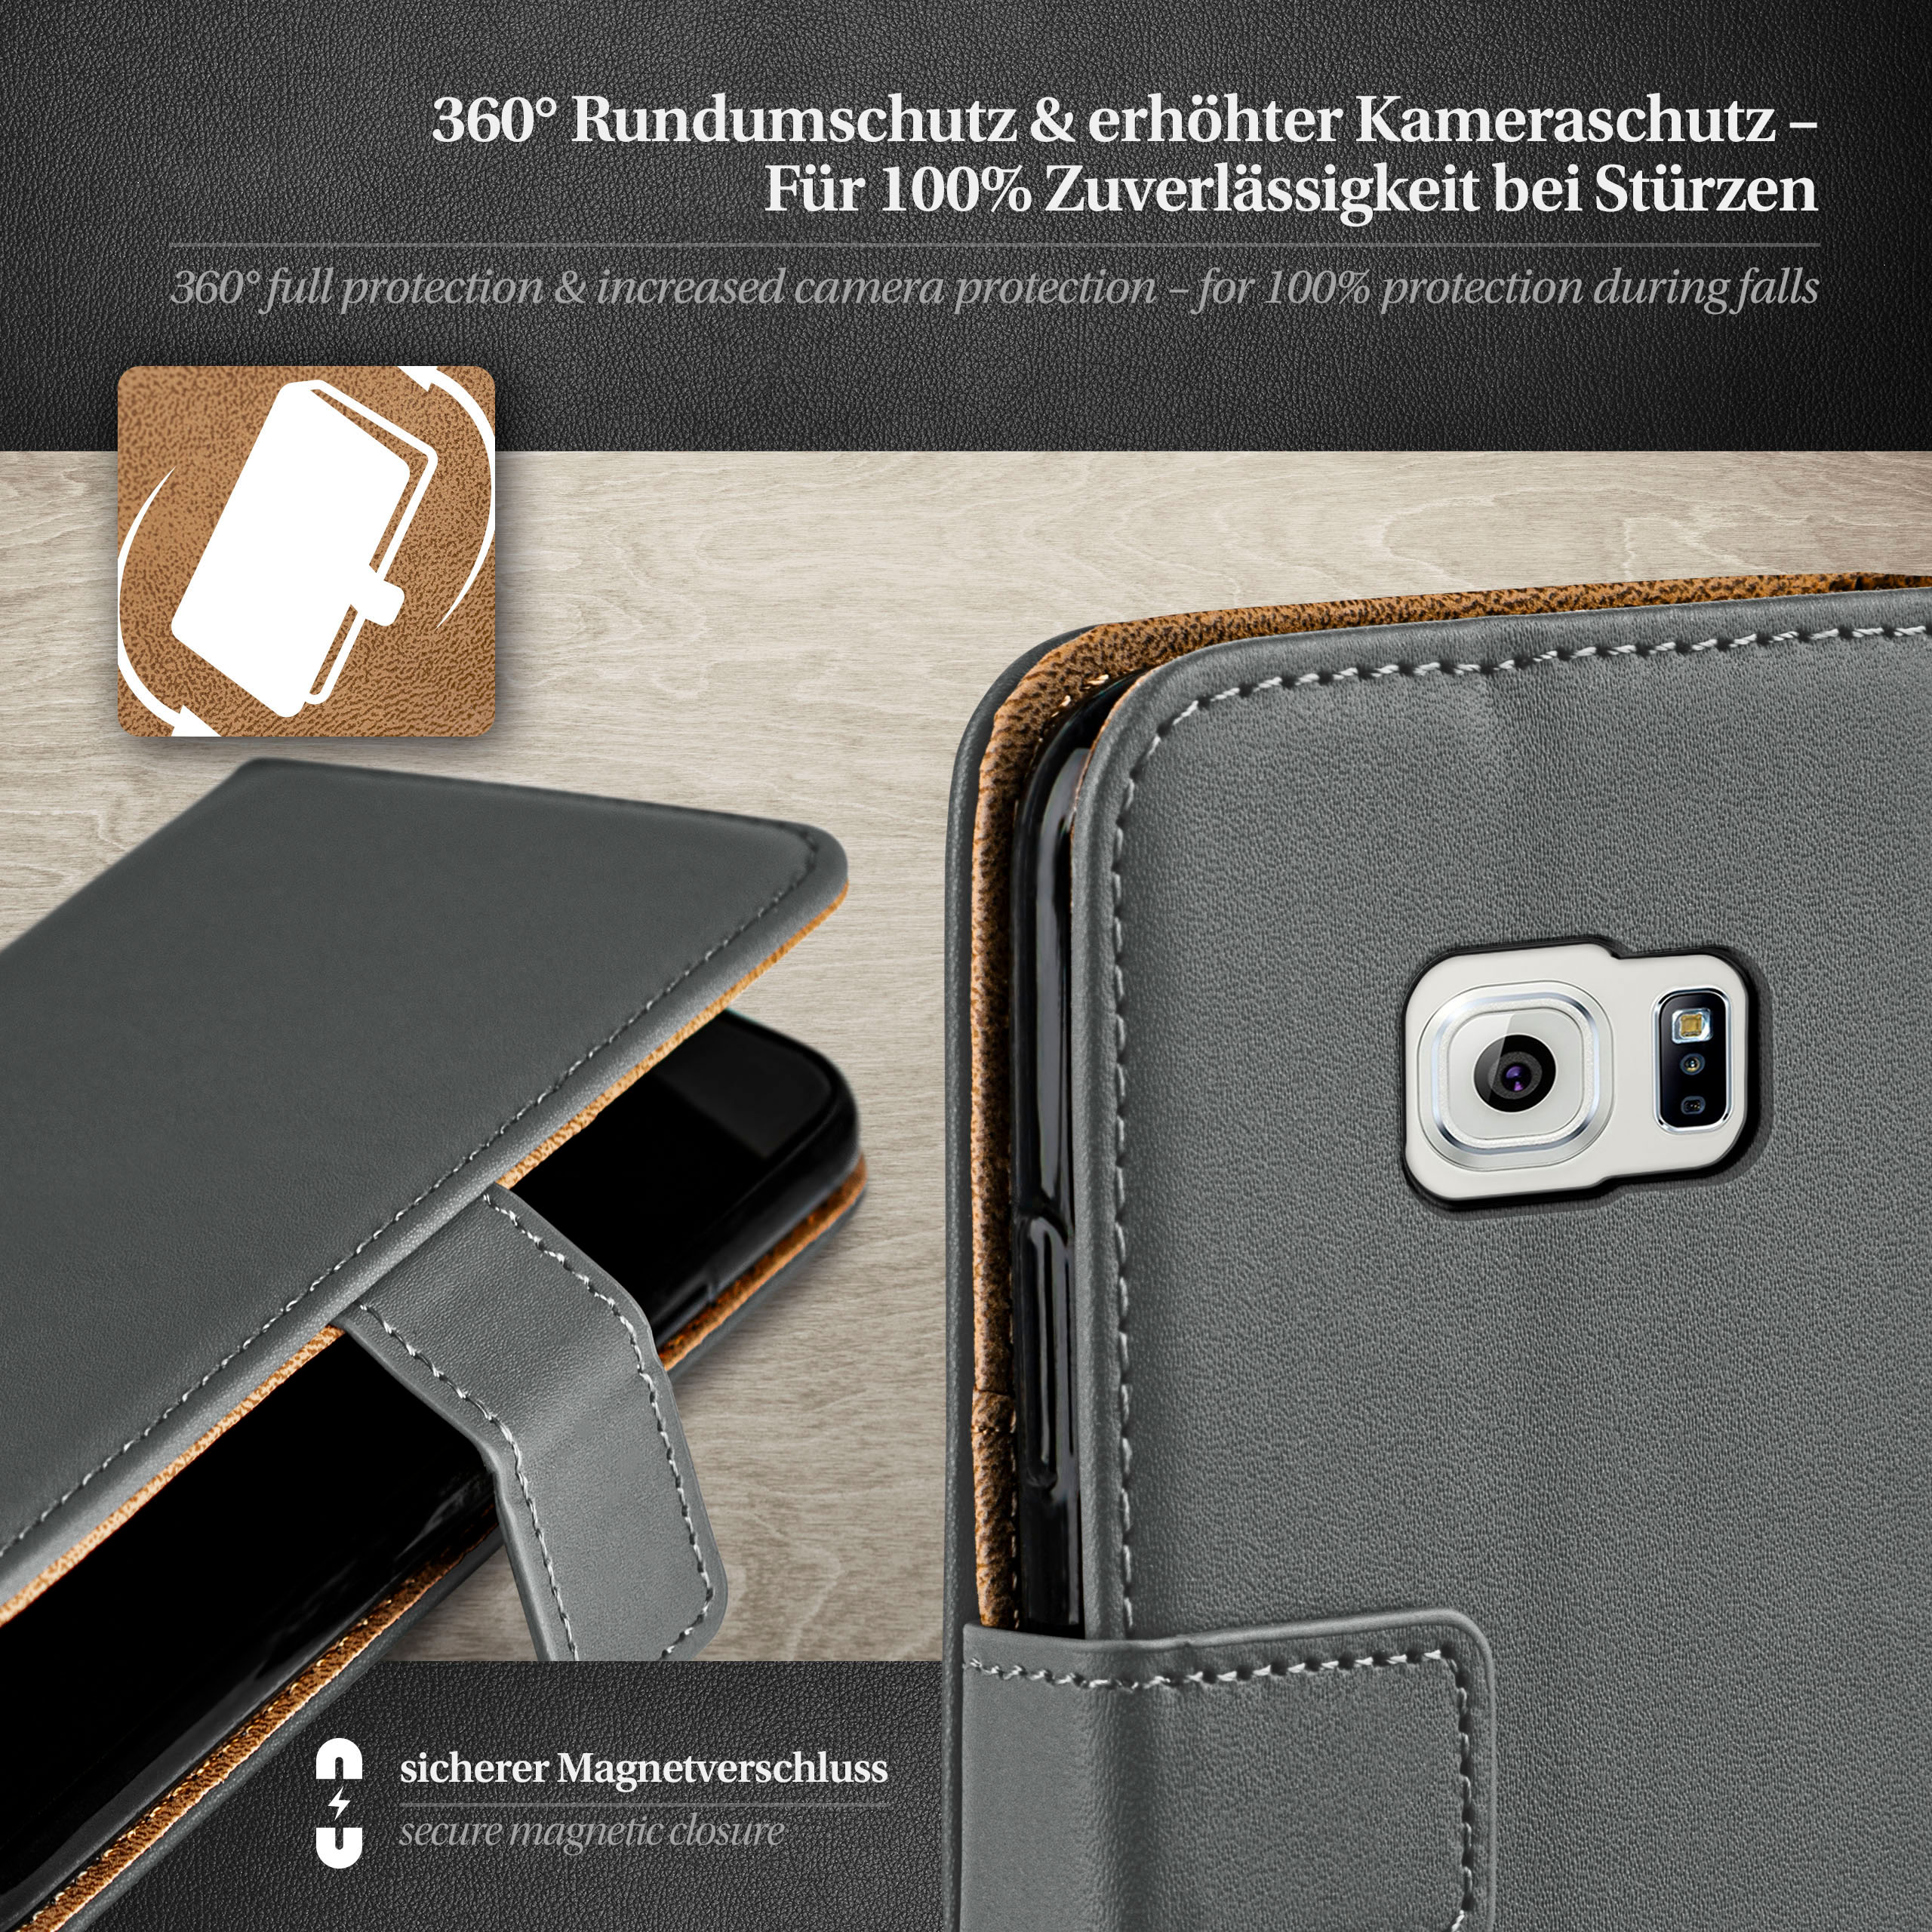 Case, S6, Bookcover, Anthracite-Gray MOEX Book Samsung, Galaxy